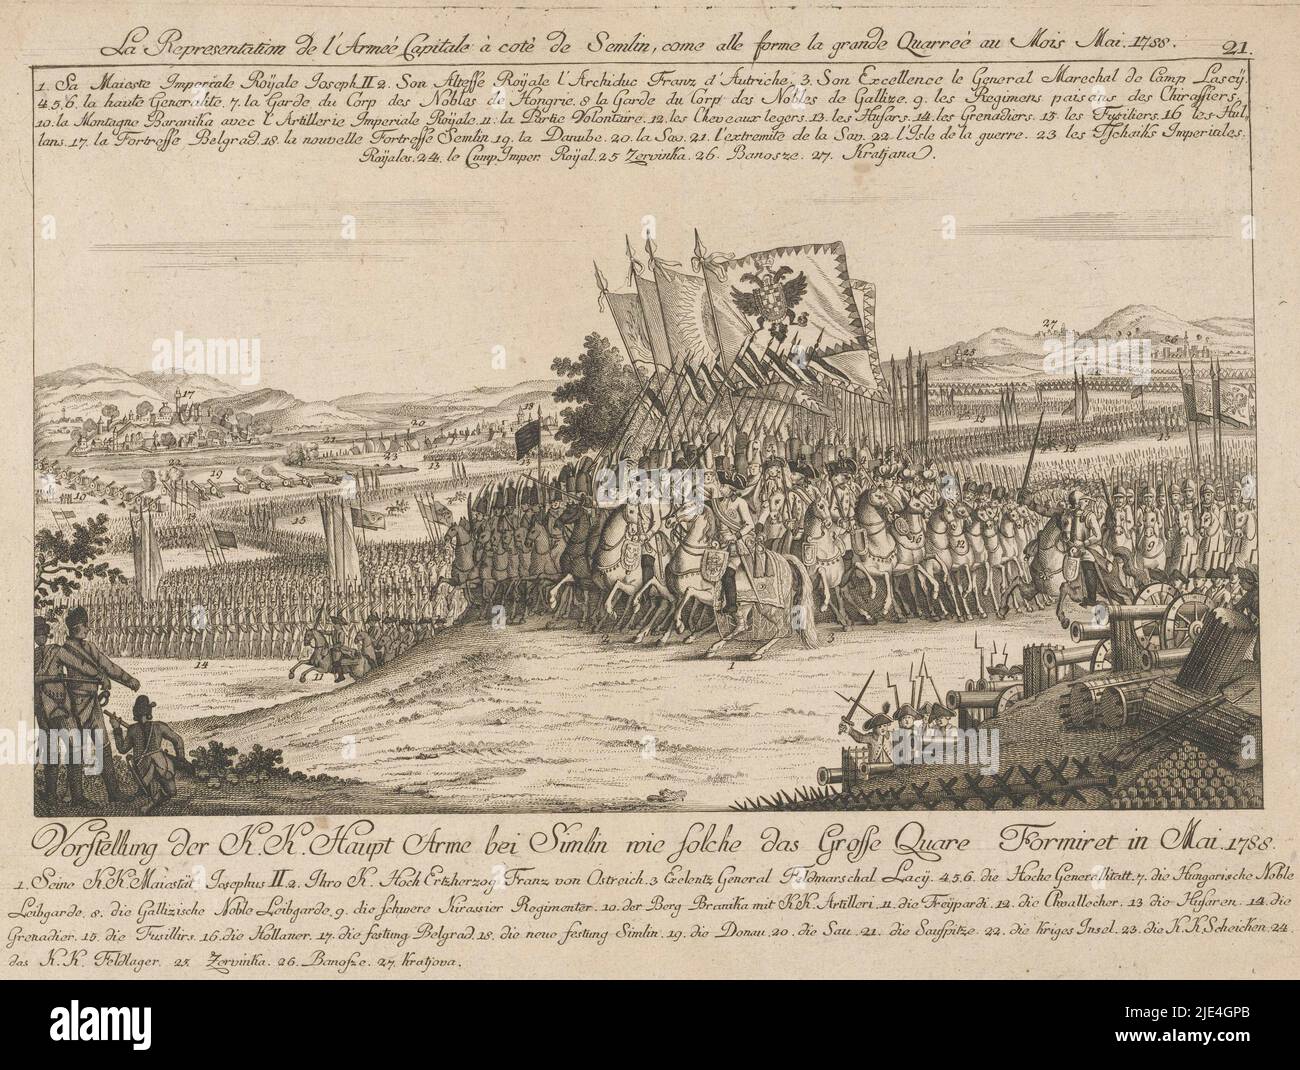 Emperor Joseph II leads the army at Zemun, 1788, anonymous, 1788 - 1790, Emperor Joseph II leads the Habsburg army against the Ottomans in the battle at near Zemun during Russo-Turkish War, May 1788. With titles and legends 1-27 in French and German. Numbered upper right: 21., print maker: anonymous, publisher: Johann Martin Will, (mentioned on object), print maker: Germany, publisher: Augsburg, 1788 - 1790, paper, etching, h 325 mm × w 422 mm Stock Photo